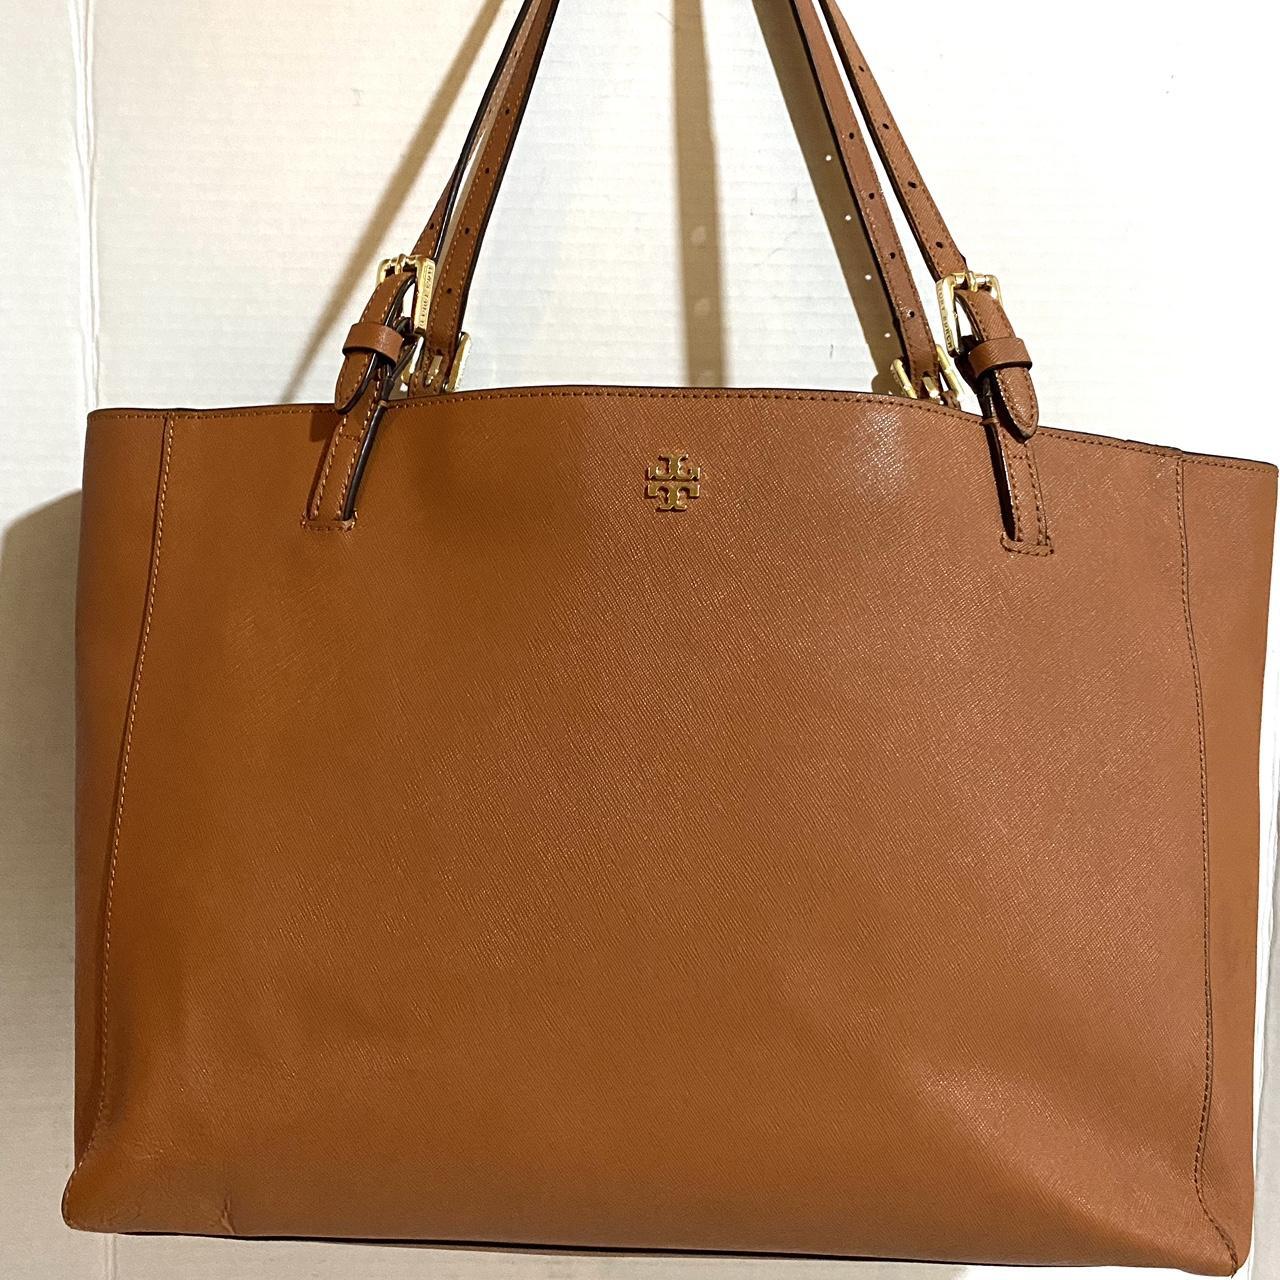 Brown leather Tory Burch handbag with lots of... - Depop